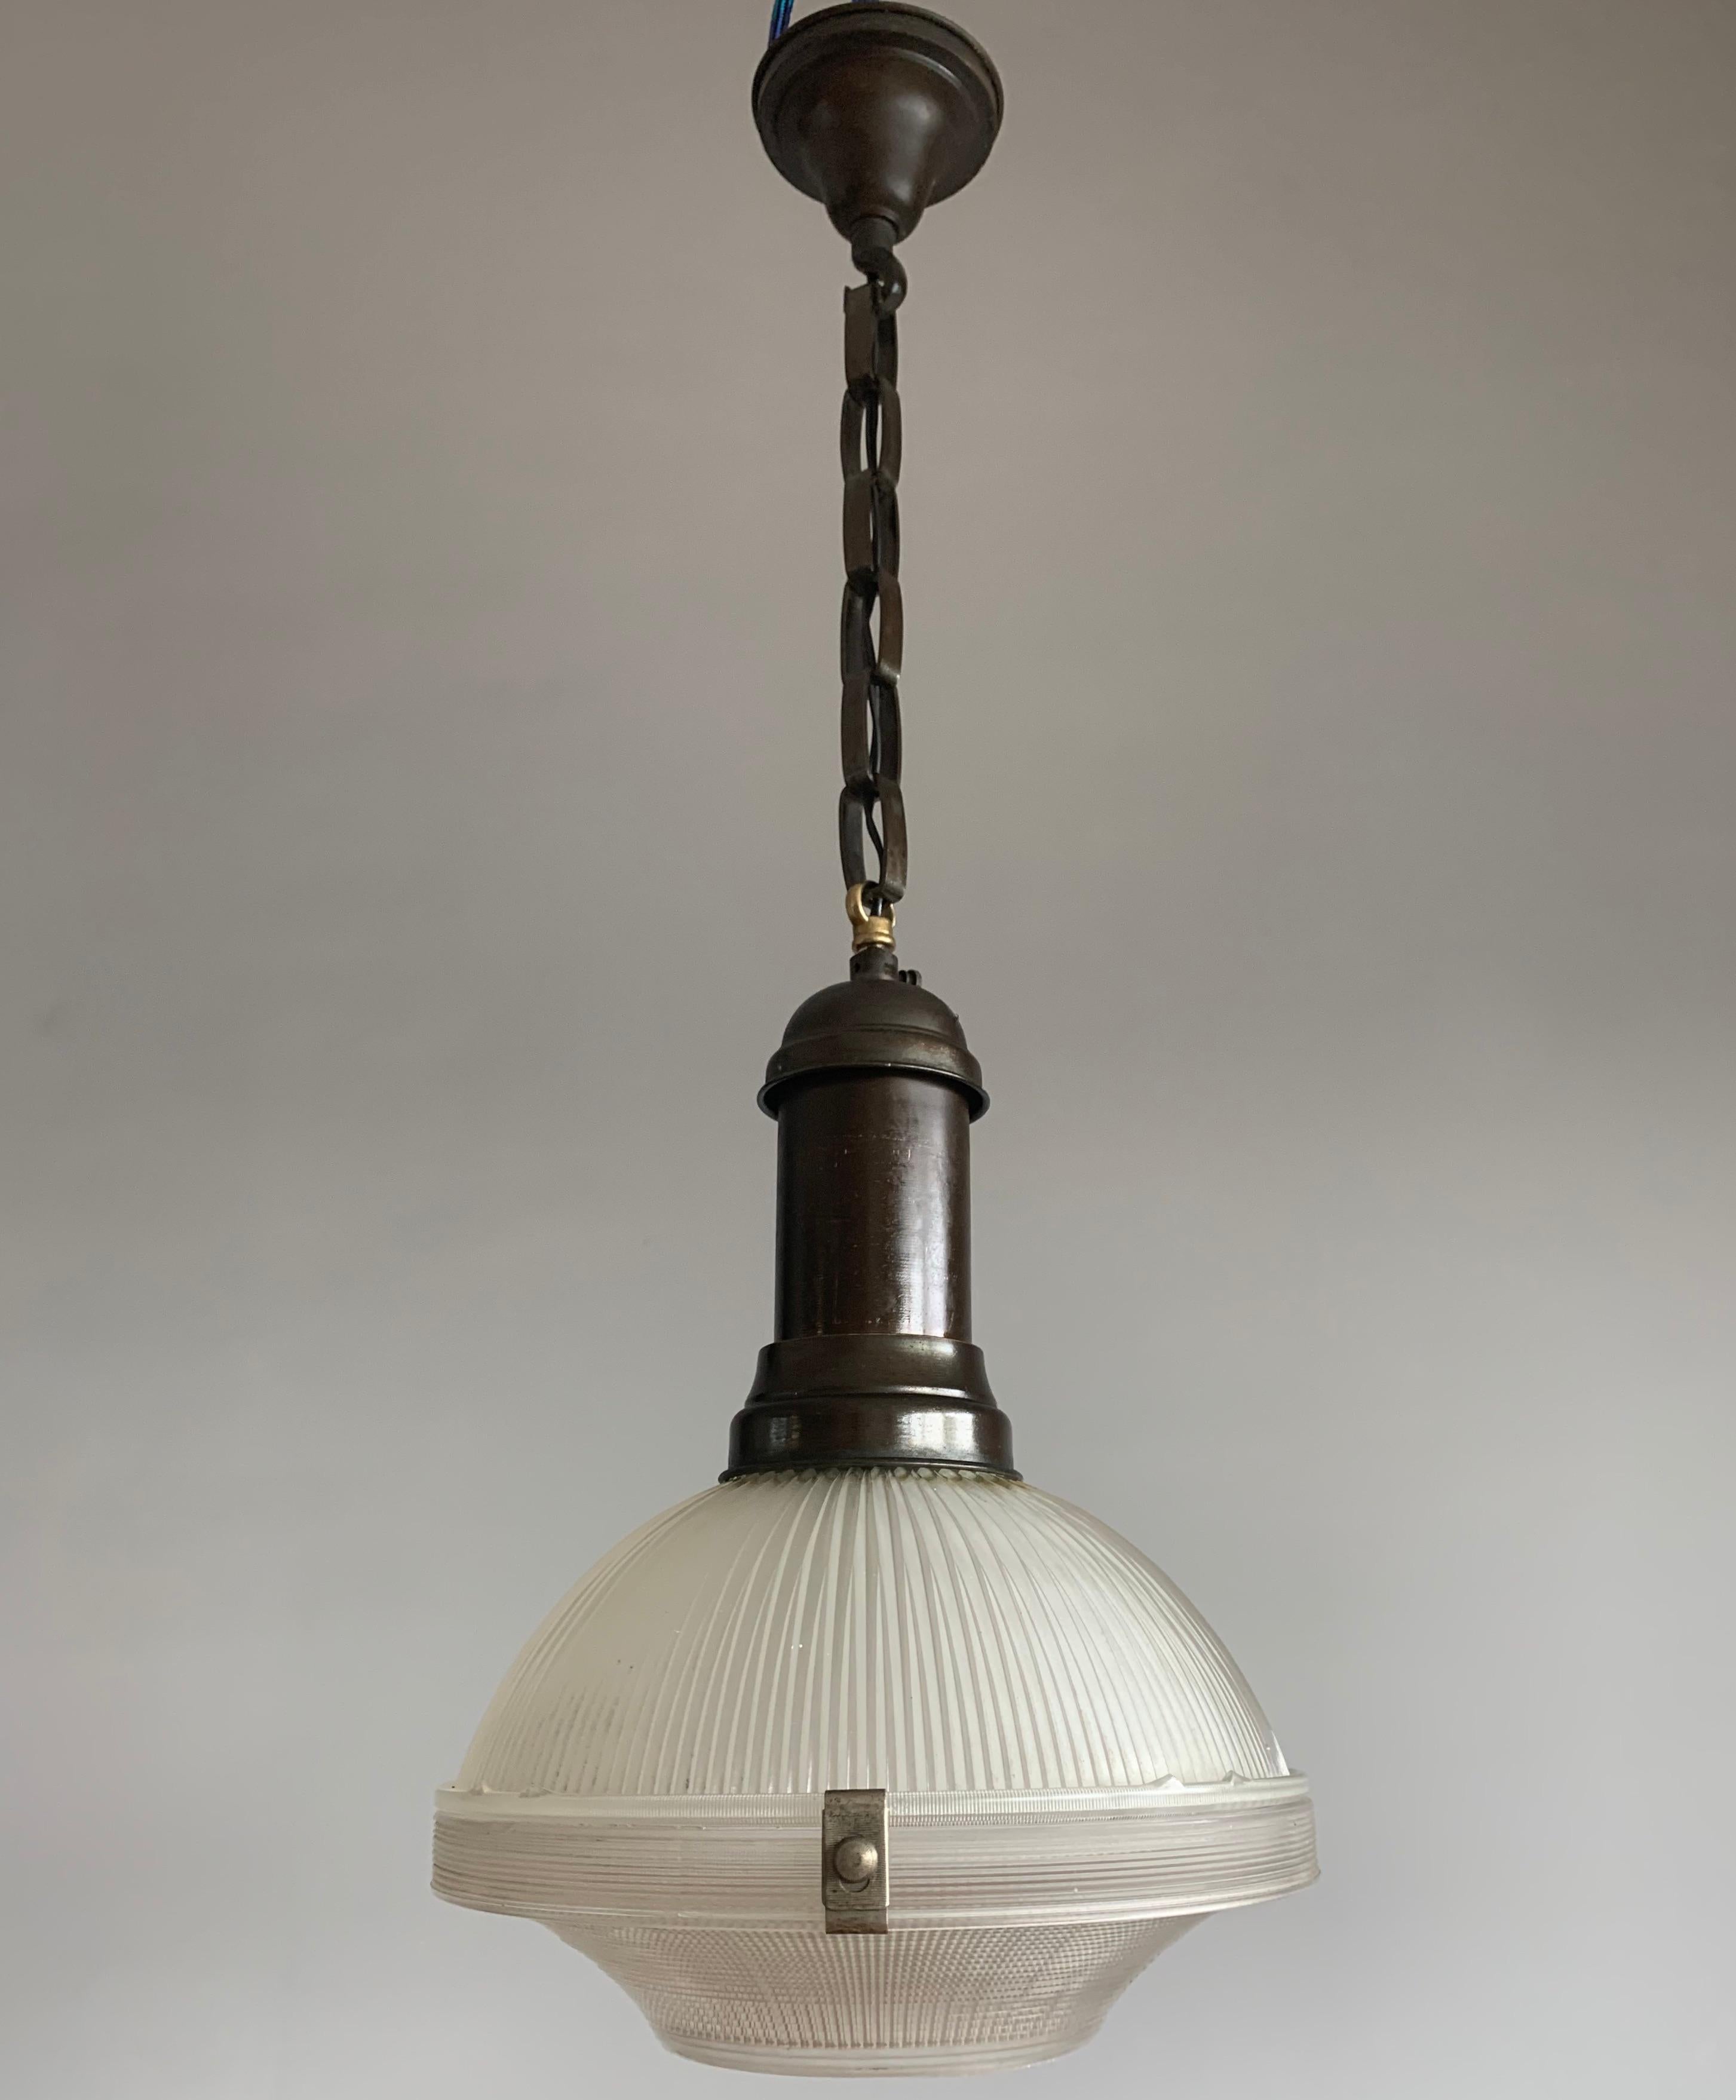 early 1900s light fixtures